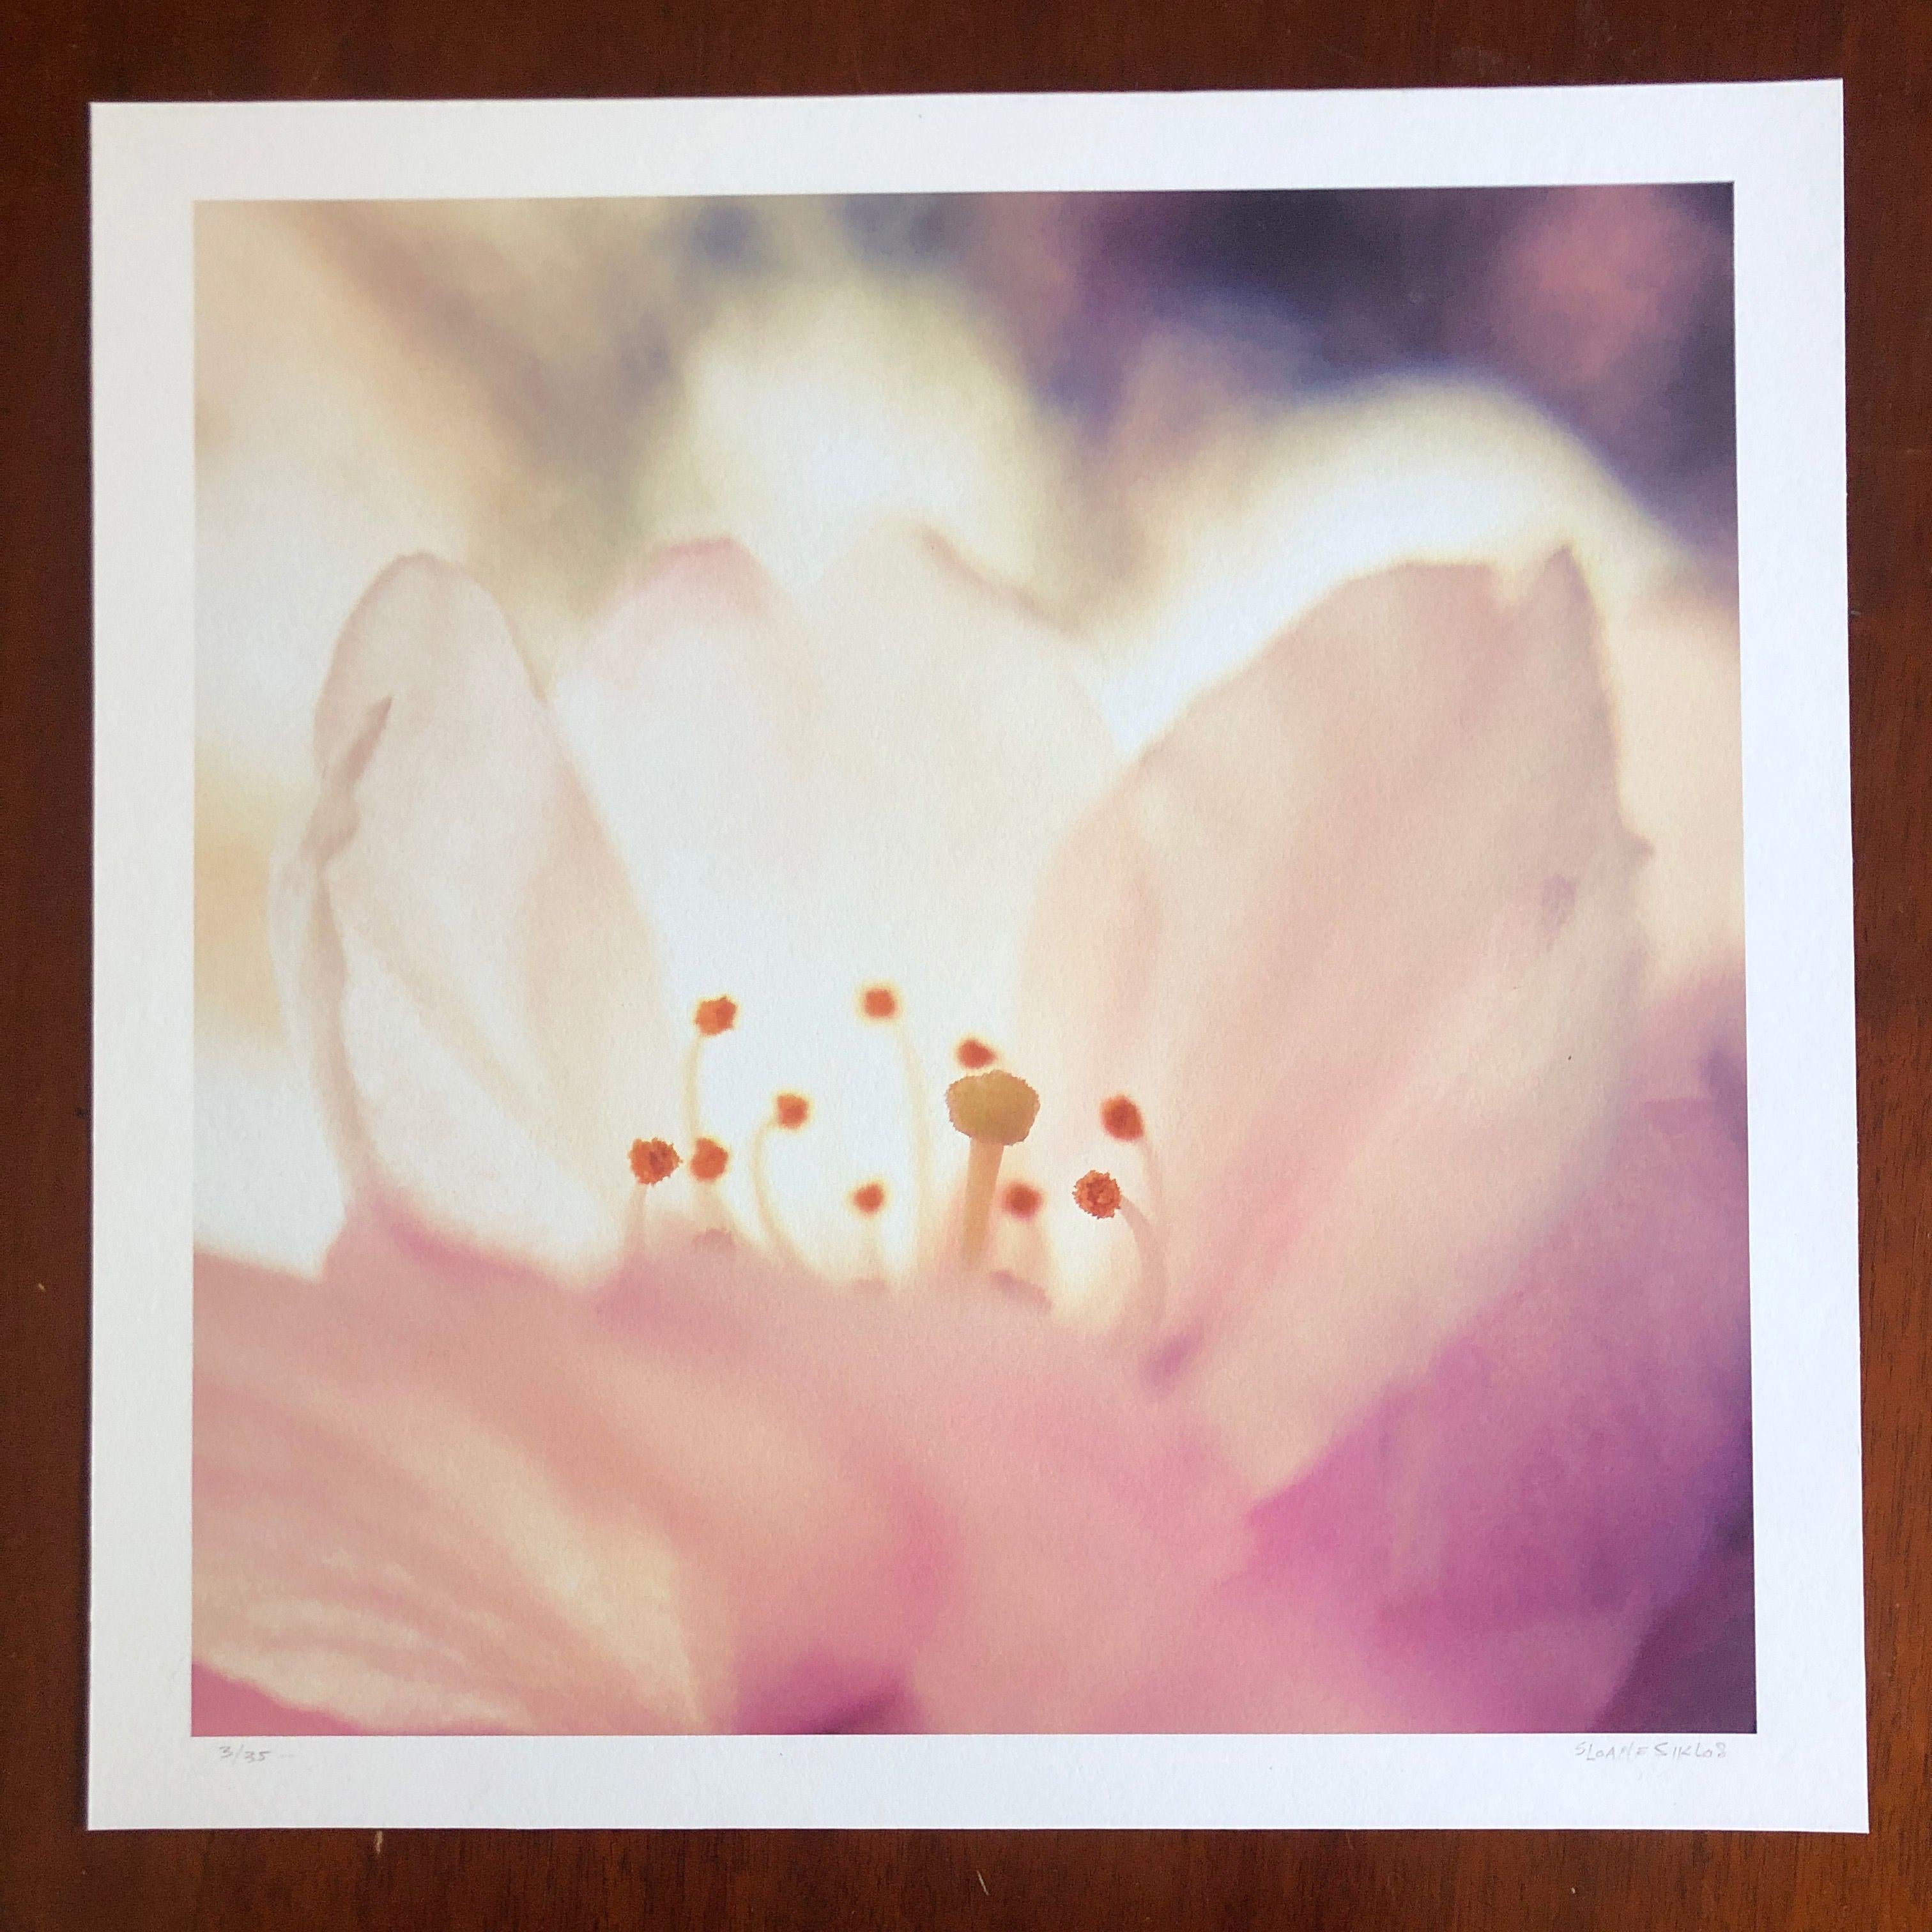 A closeup photograph of a delicately pink cherry blossom, from early spring in Japan. This is one of a series of cherry blossom photographs.     The photograph is an archival inkjet print, on  heavy white fine art paper, with a very slightly